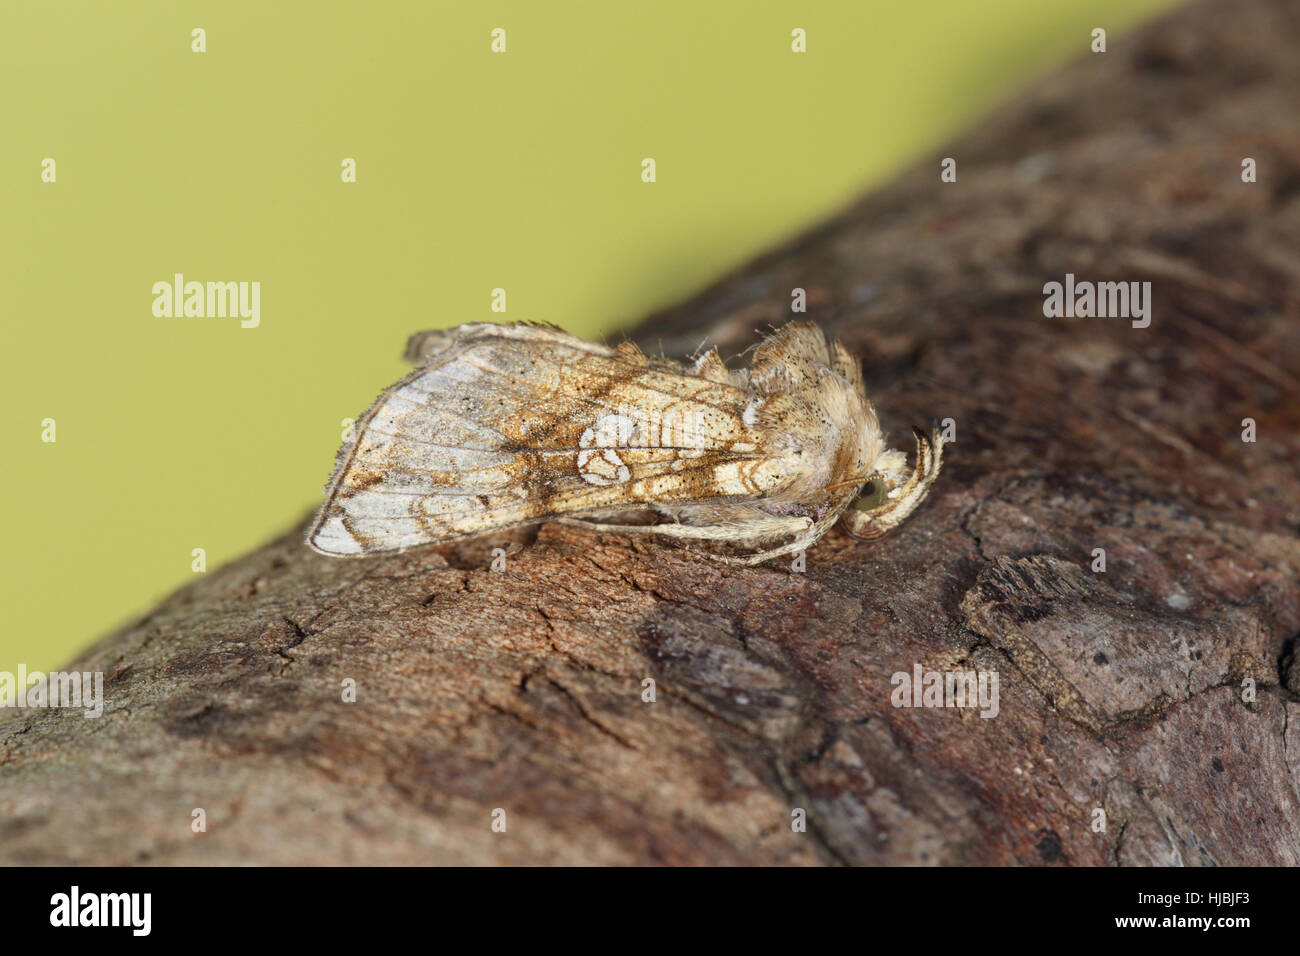 Golden Plusia (Polychrysia moneta), a localised golden moth, sitting on a branch Stock Photo